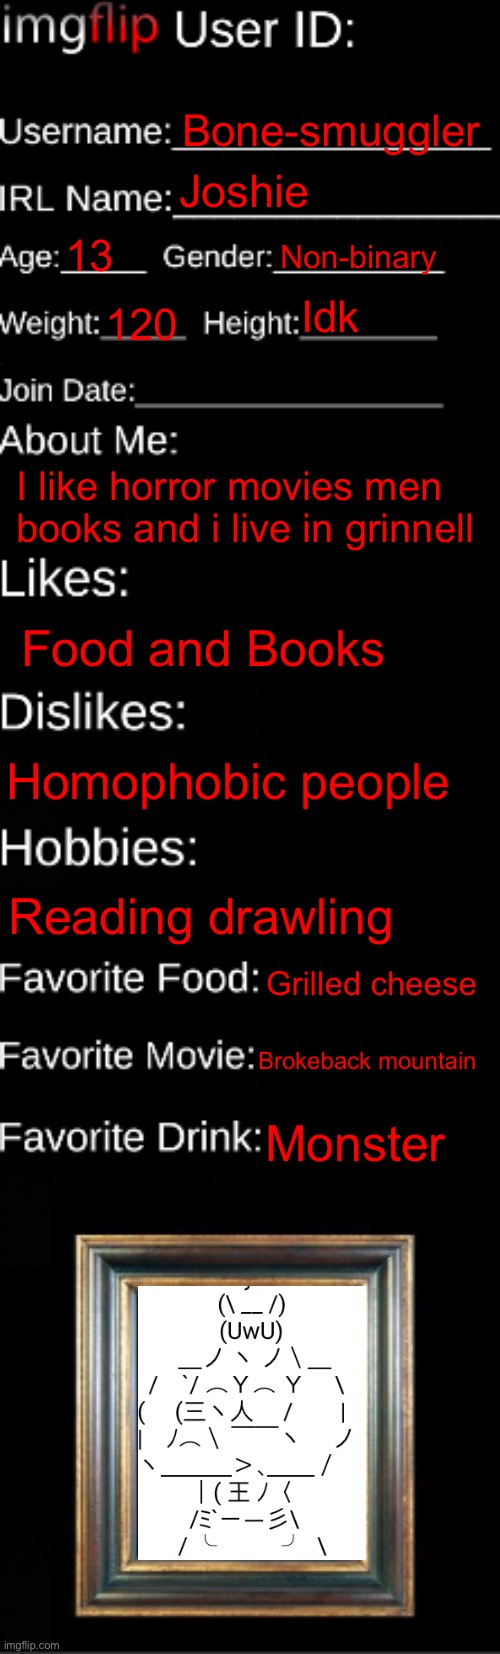 About me | Bone-smuggler; Joshie; 13; Non-binary; Idk; 120; I like horror movies men books and i live in grinnell; Food and Books; Homophobic people; Reading drawling; Grilled cheese; Brokeback mountain; Monster | image tagged in imgflip id card | made w/ Imgflip meme maker